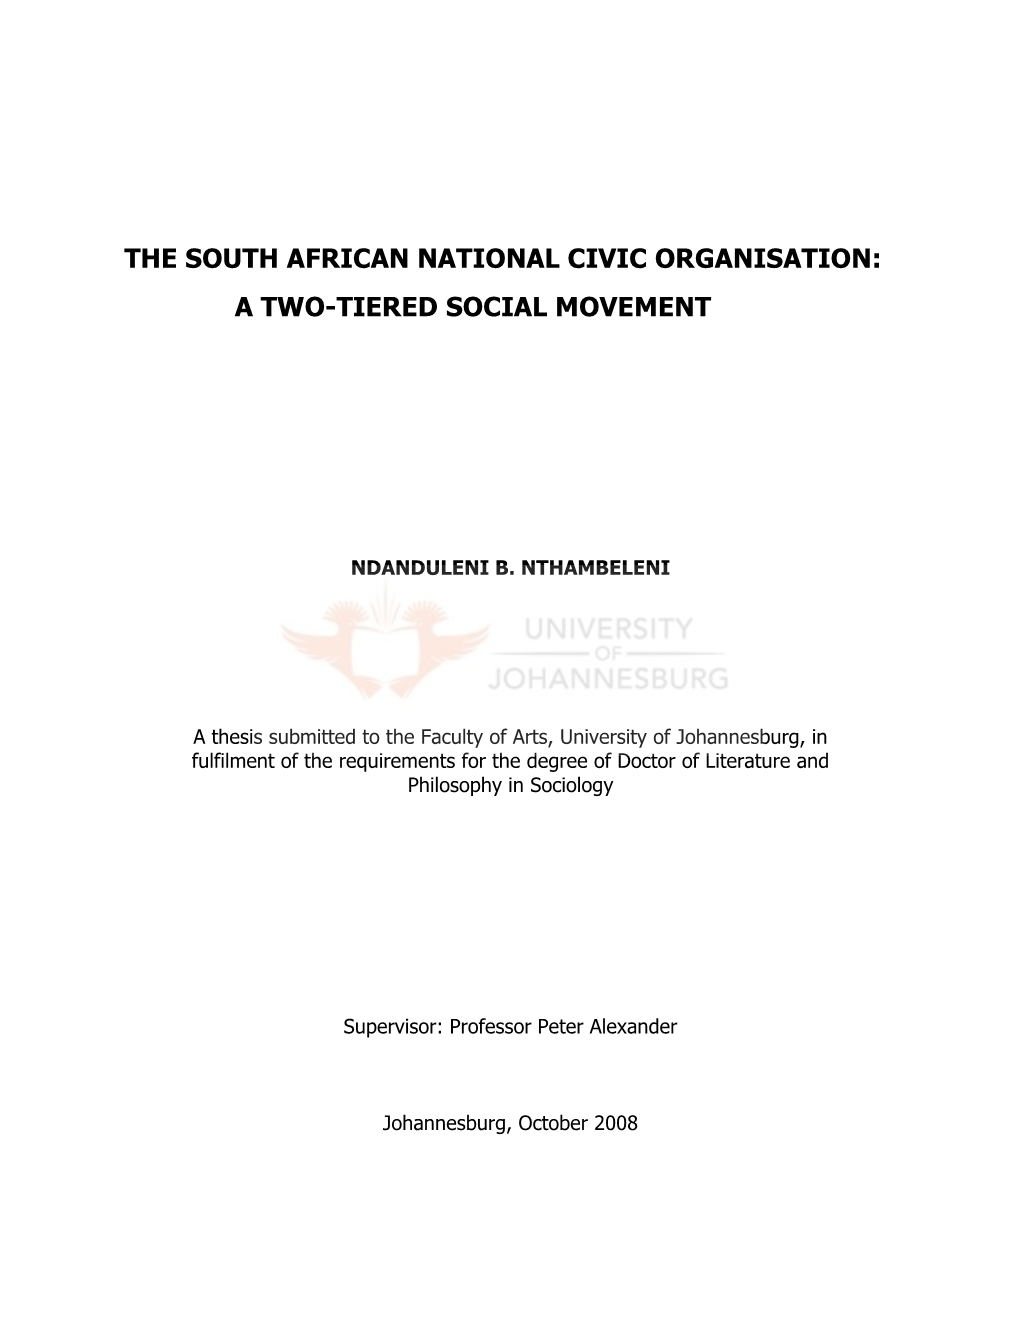 The South African National Civic Organisation: a Two-Tiered Social Movement